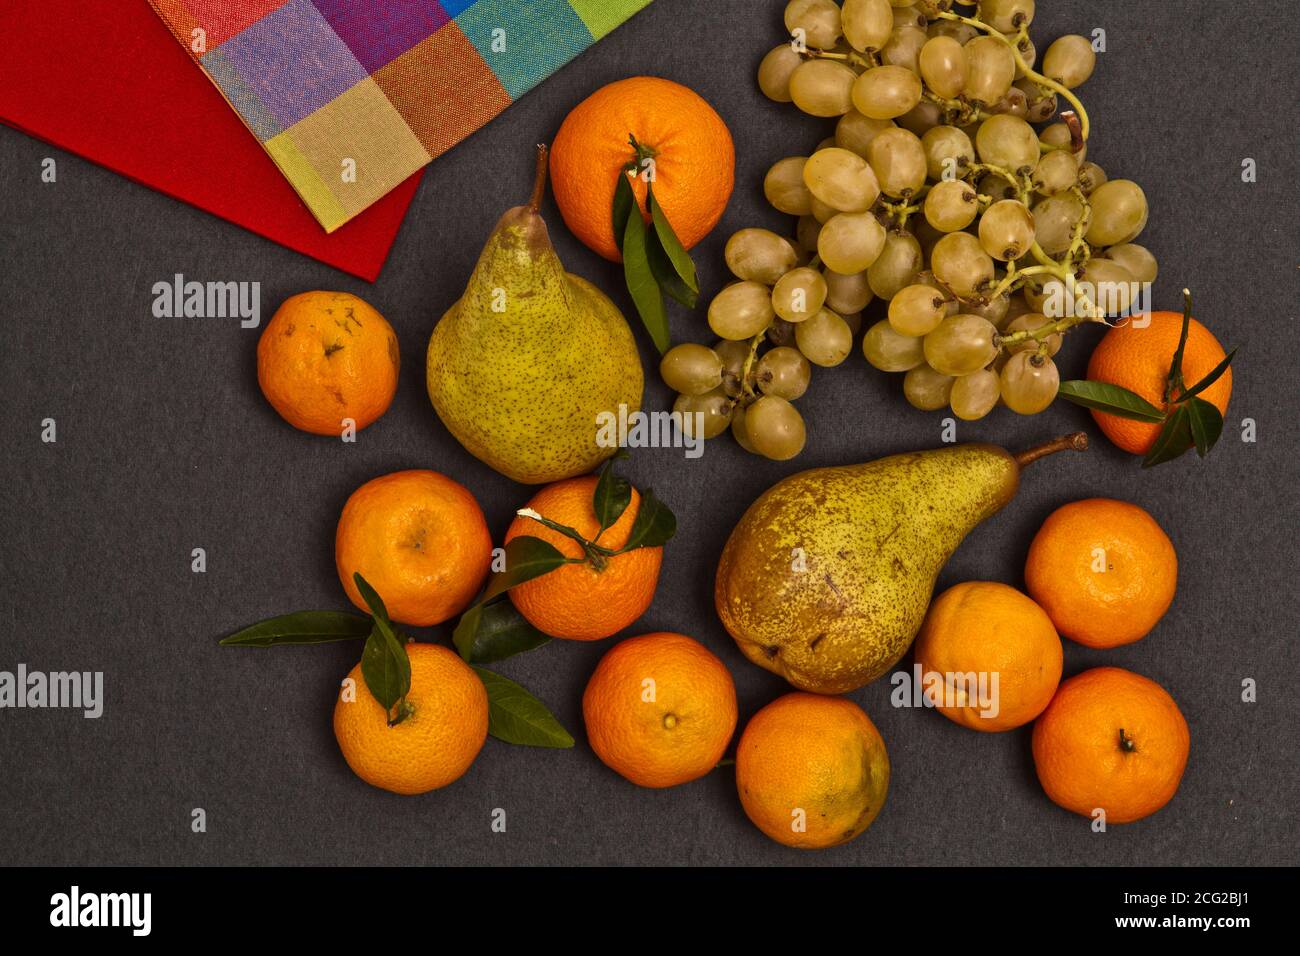 grapes, tangerines and pears Stock Photo